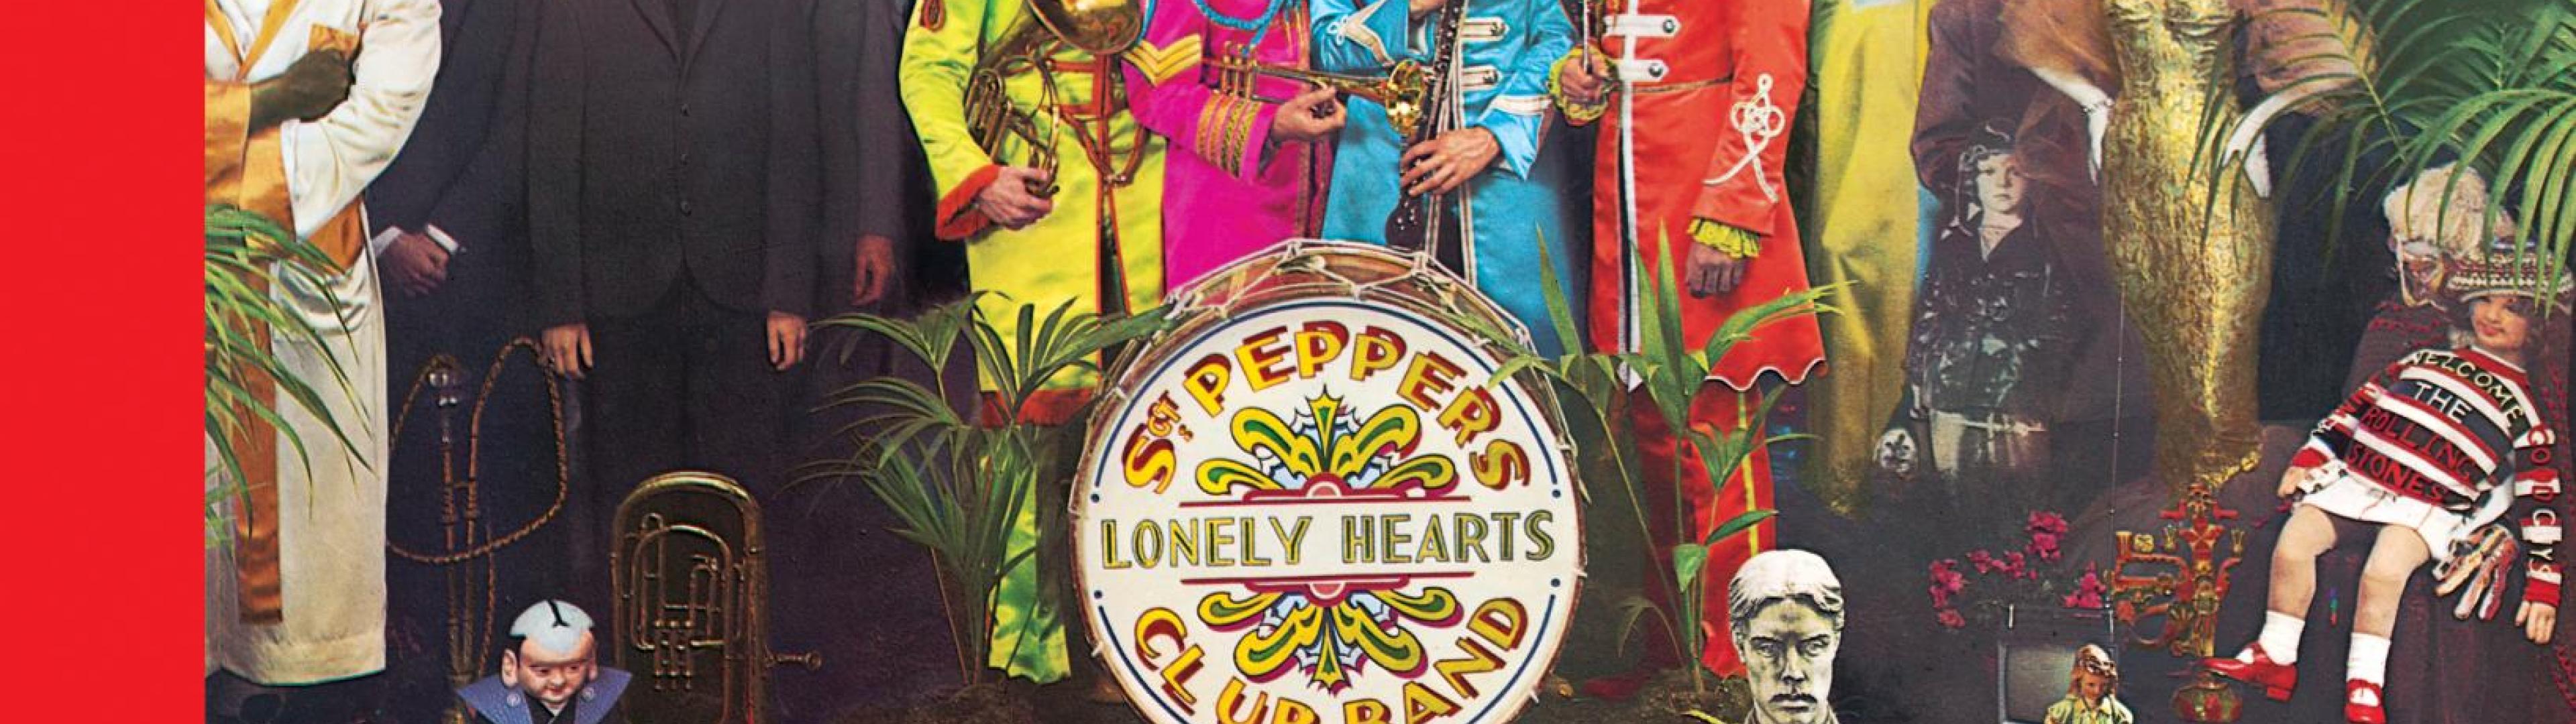 Music The Beatles Sgt Pepper Lonely Hearts Osdh